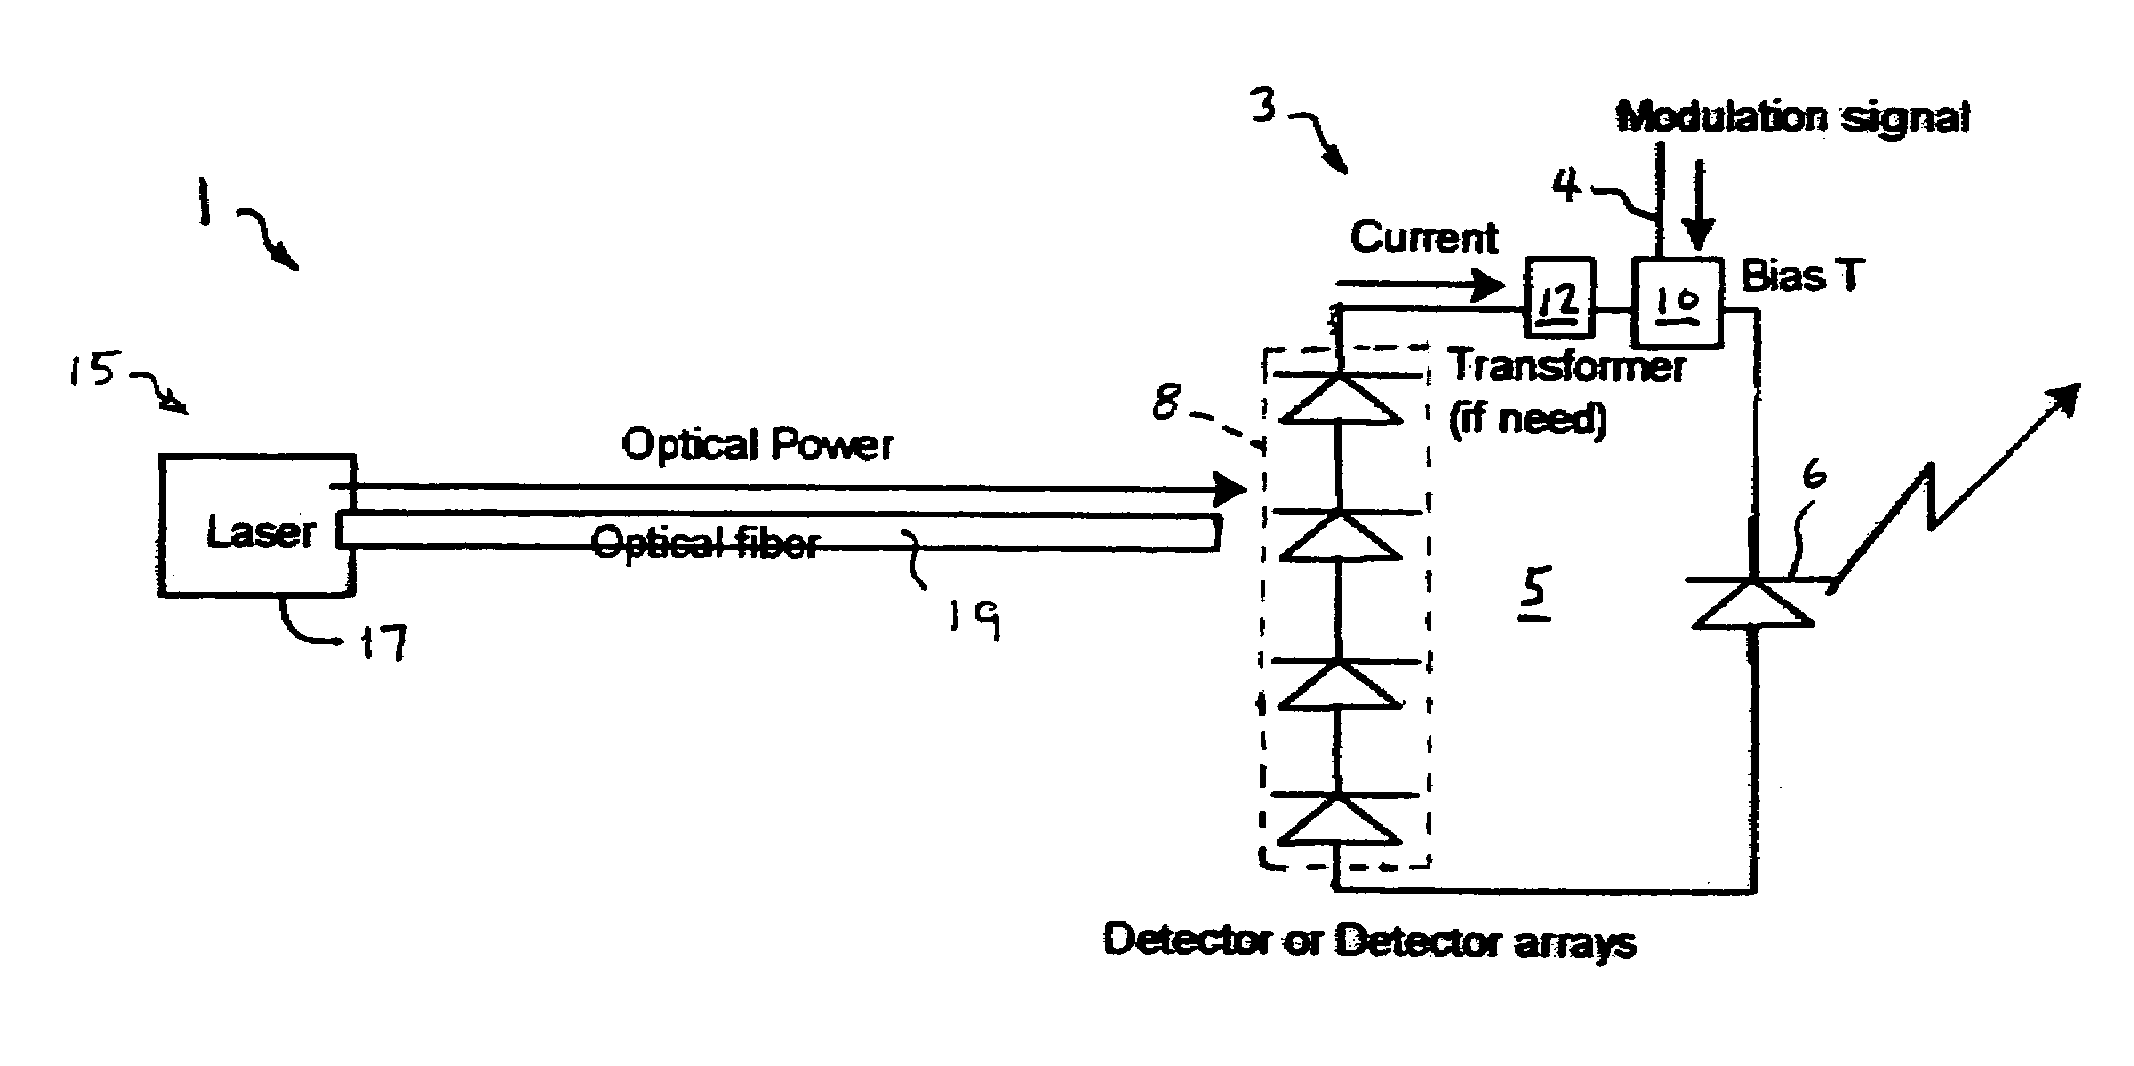 System and method for optically powering a remote network component